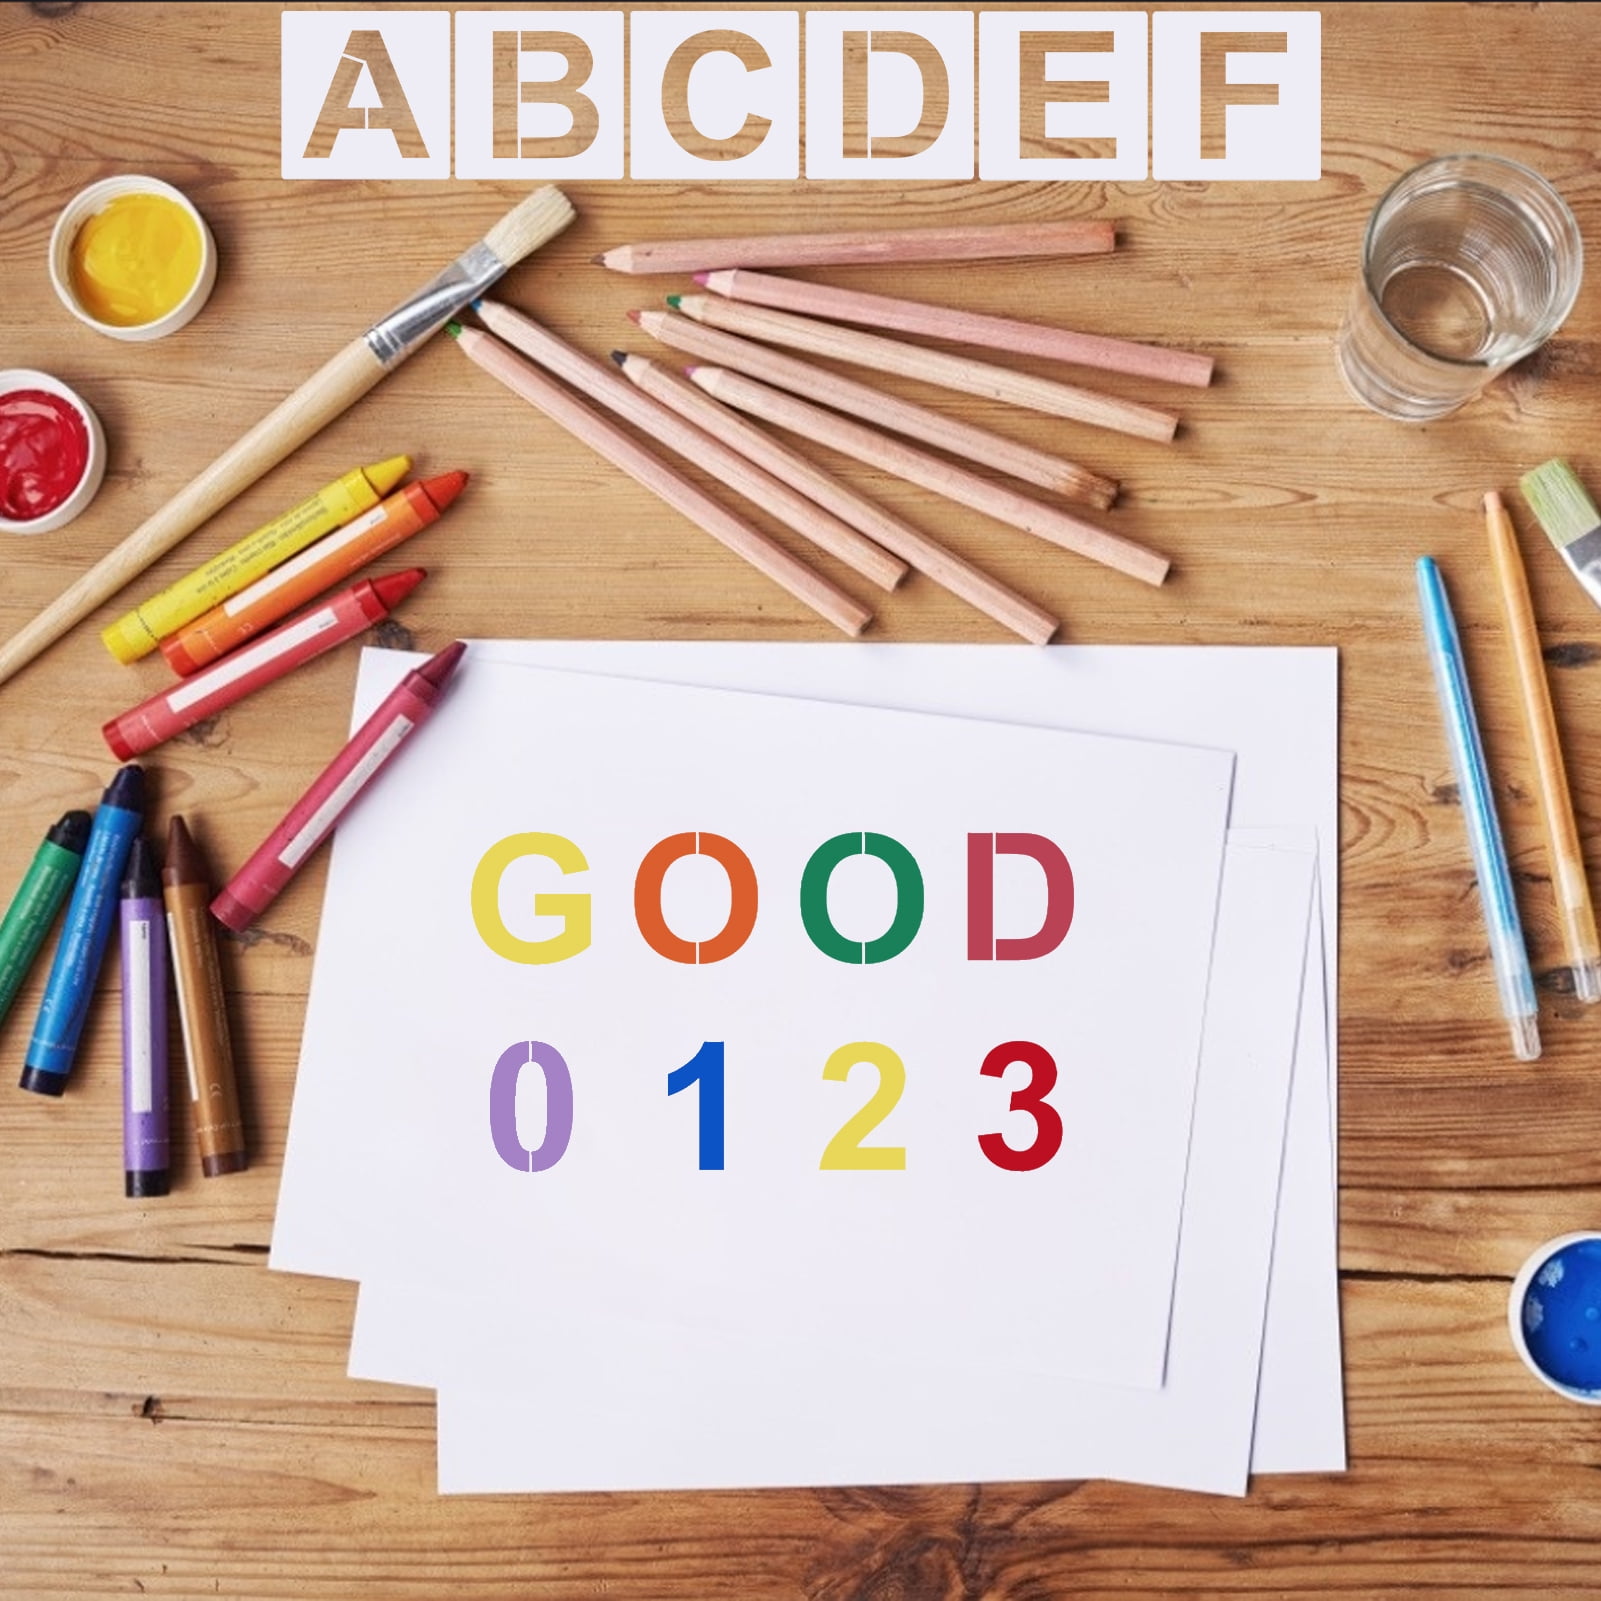  36 Pcs Letter Stencils 3 Inches Alphabet Letter Templates  Reusable Letter and Number Stencils Art Craft Stencils for Painting Letters  Numbers on Wall Glass Wood Chalkboard Door Fence Floor Fabric